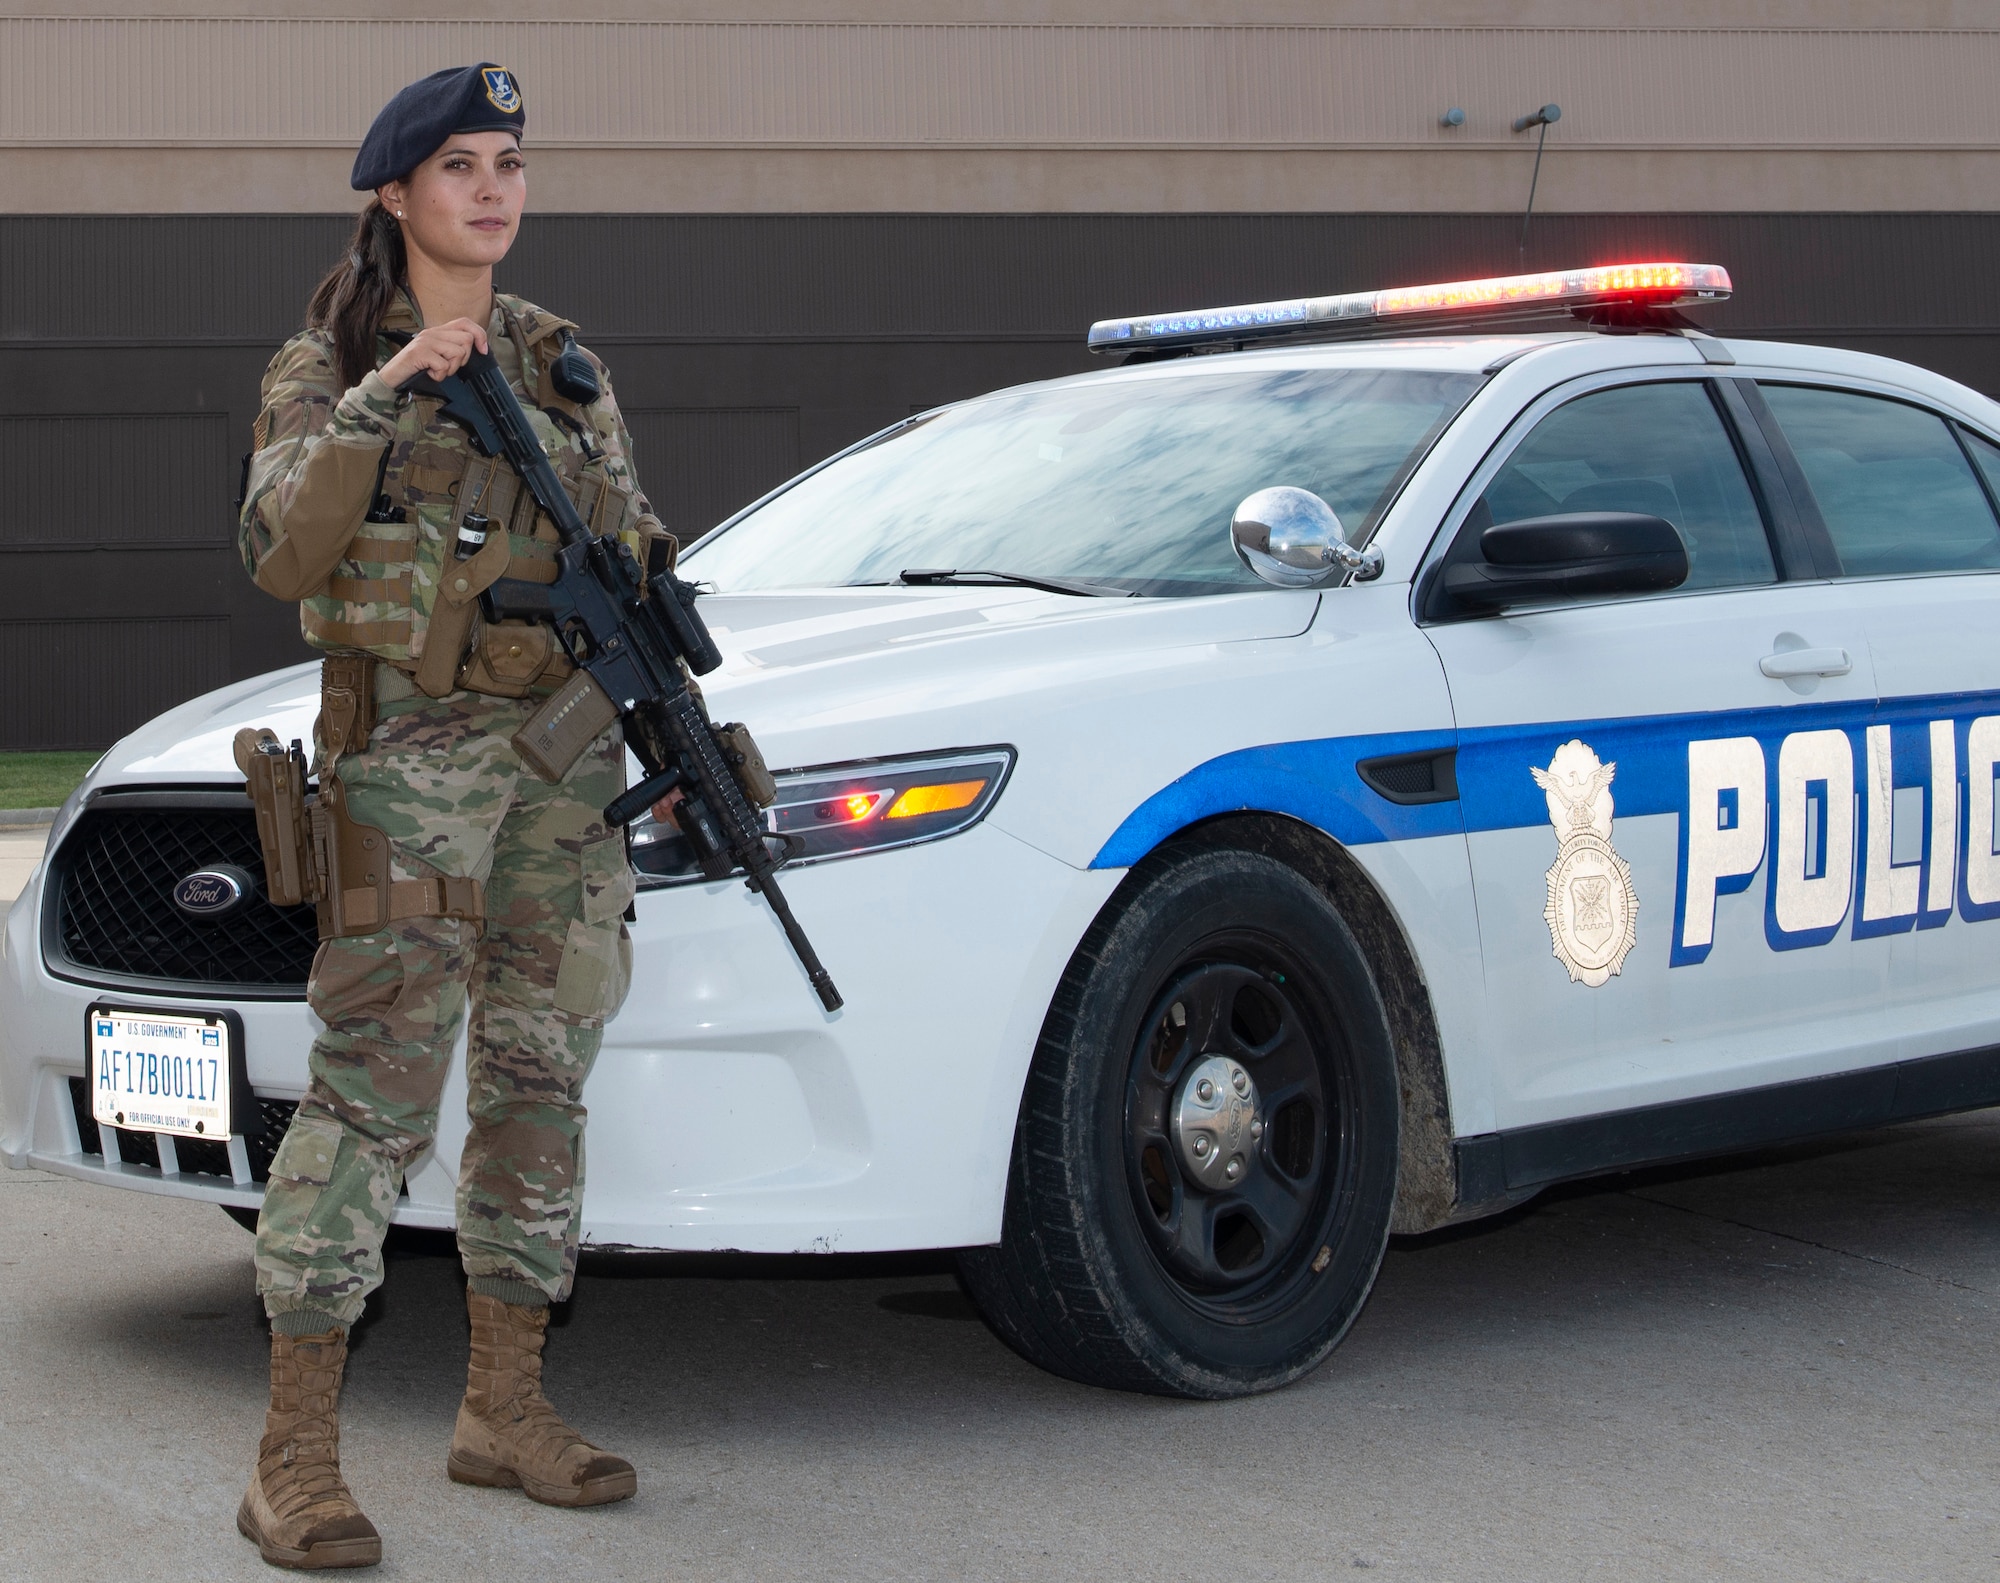 Female Airman in uniform standing guard while holding her weapon, in front of a security forces police car with it's lights flashing. Airman wearing new body armor specifically designed for women